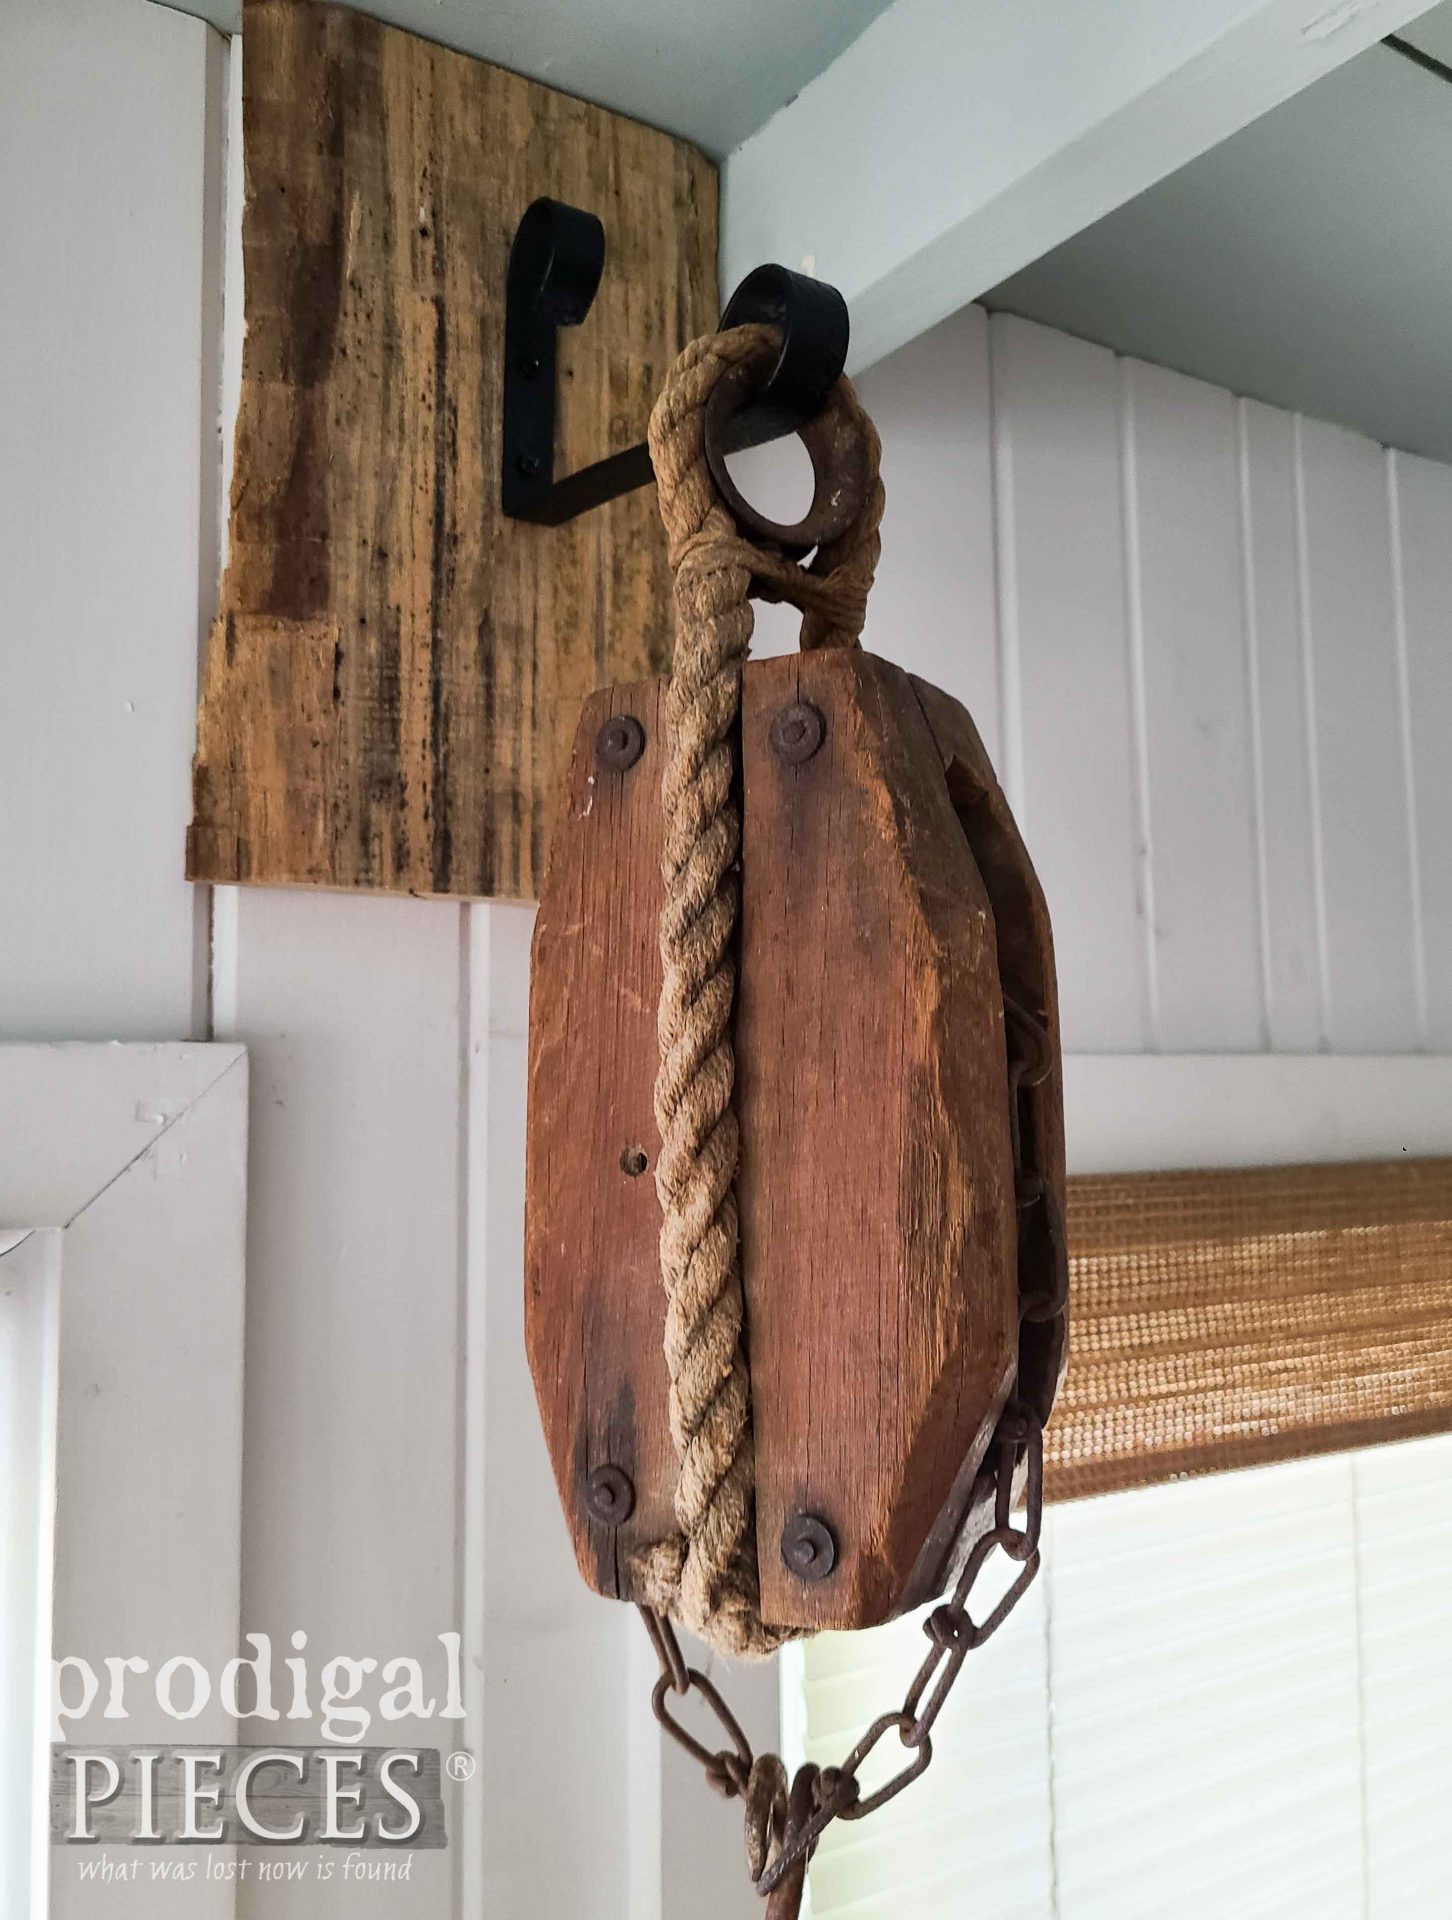 Antique Farmhouse Hay Bale Pulley for Thrifted Basket Makeover by Prodigal Pieces | prodigalpieces.com #prodigalpieces #antique #farmhouse #diy #homedecor